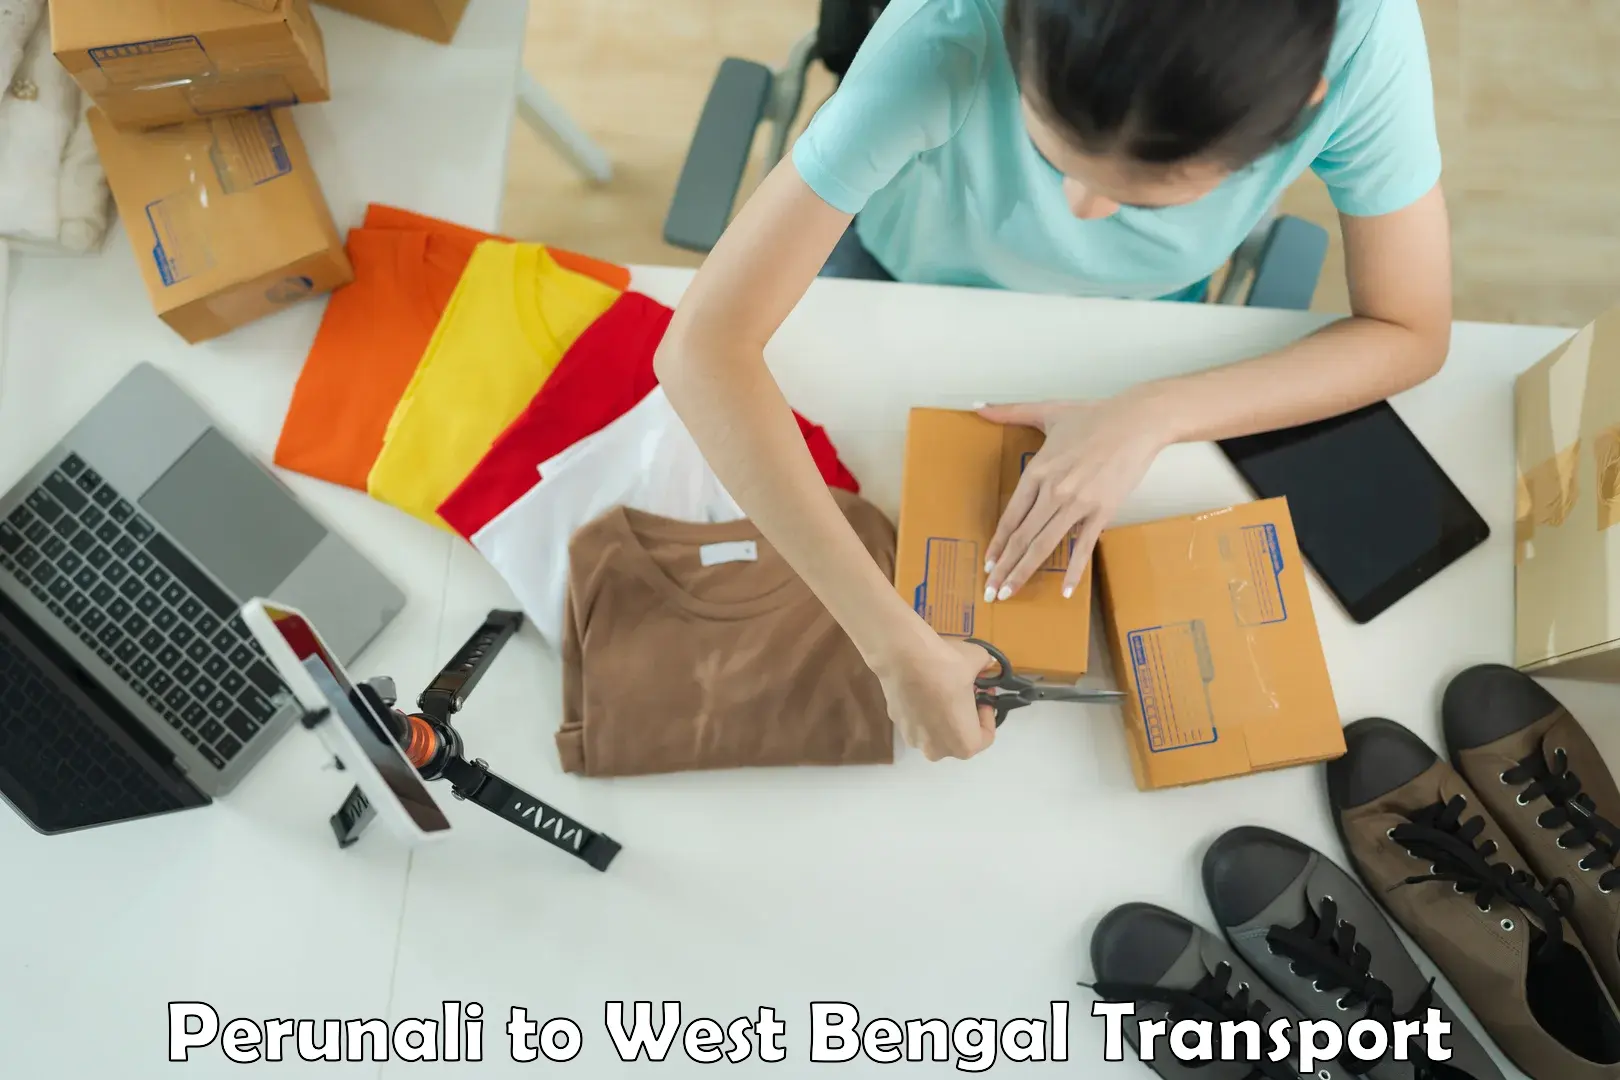 Nationwide transport services Perunali to West Bengal